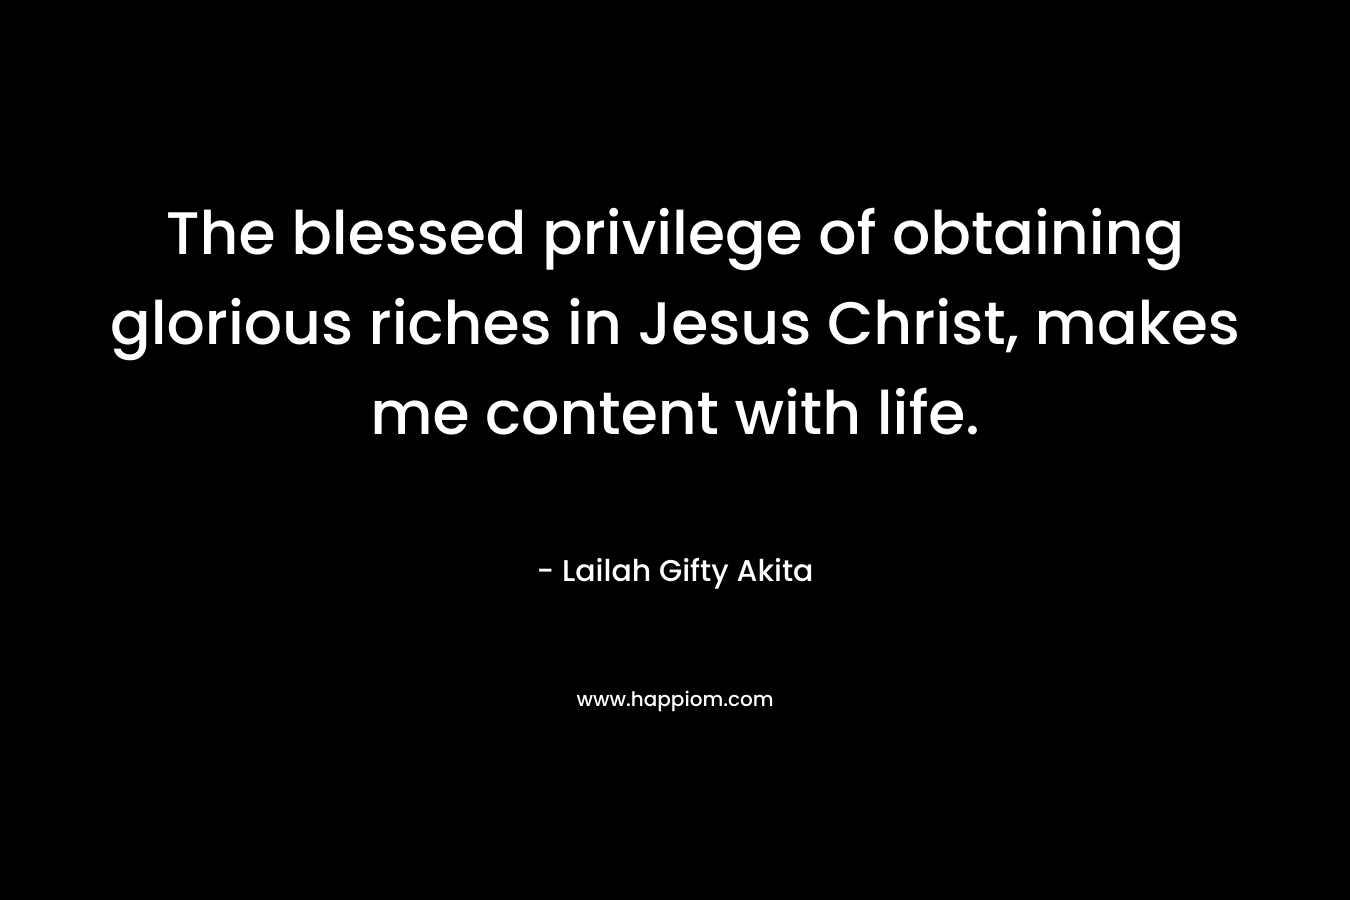 The blessed privilege of obtaining glorious riches in Jesus Christ, makes me content with life.